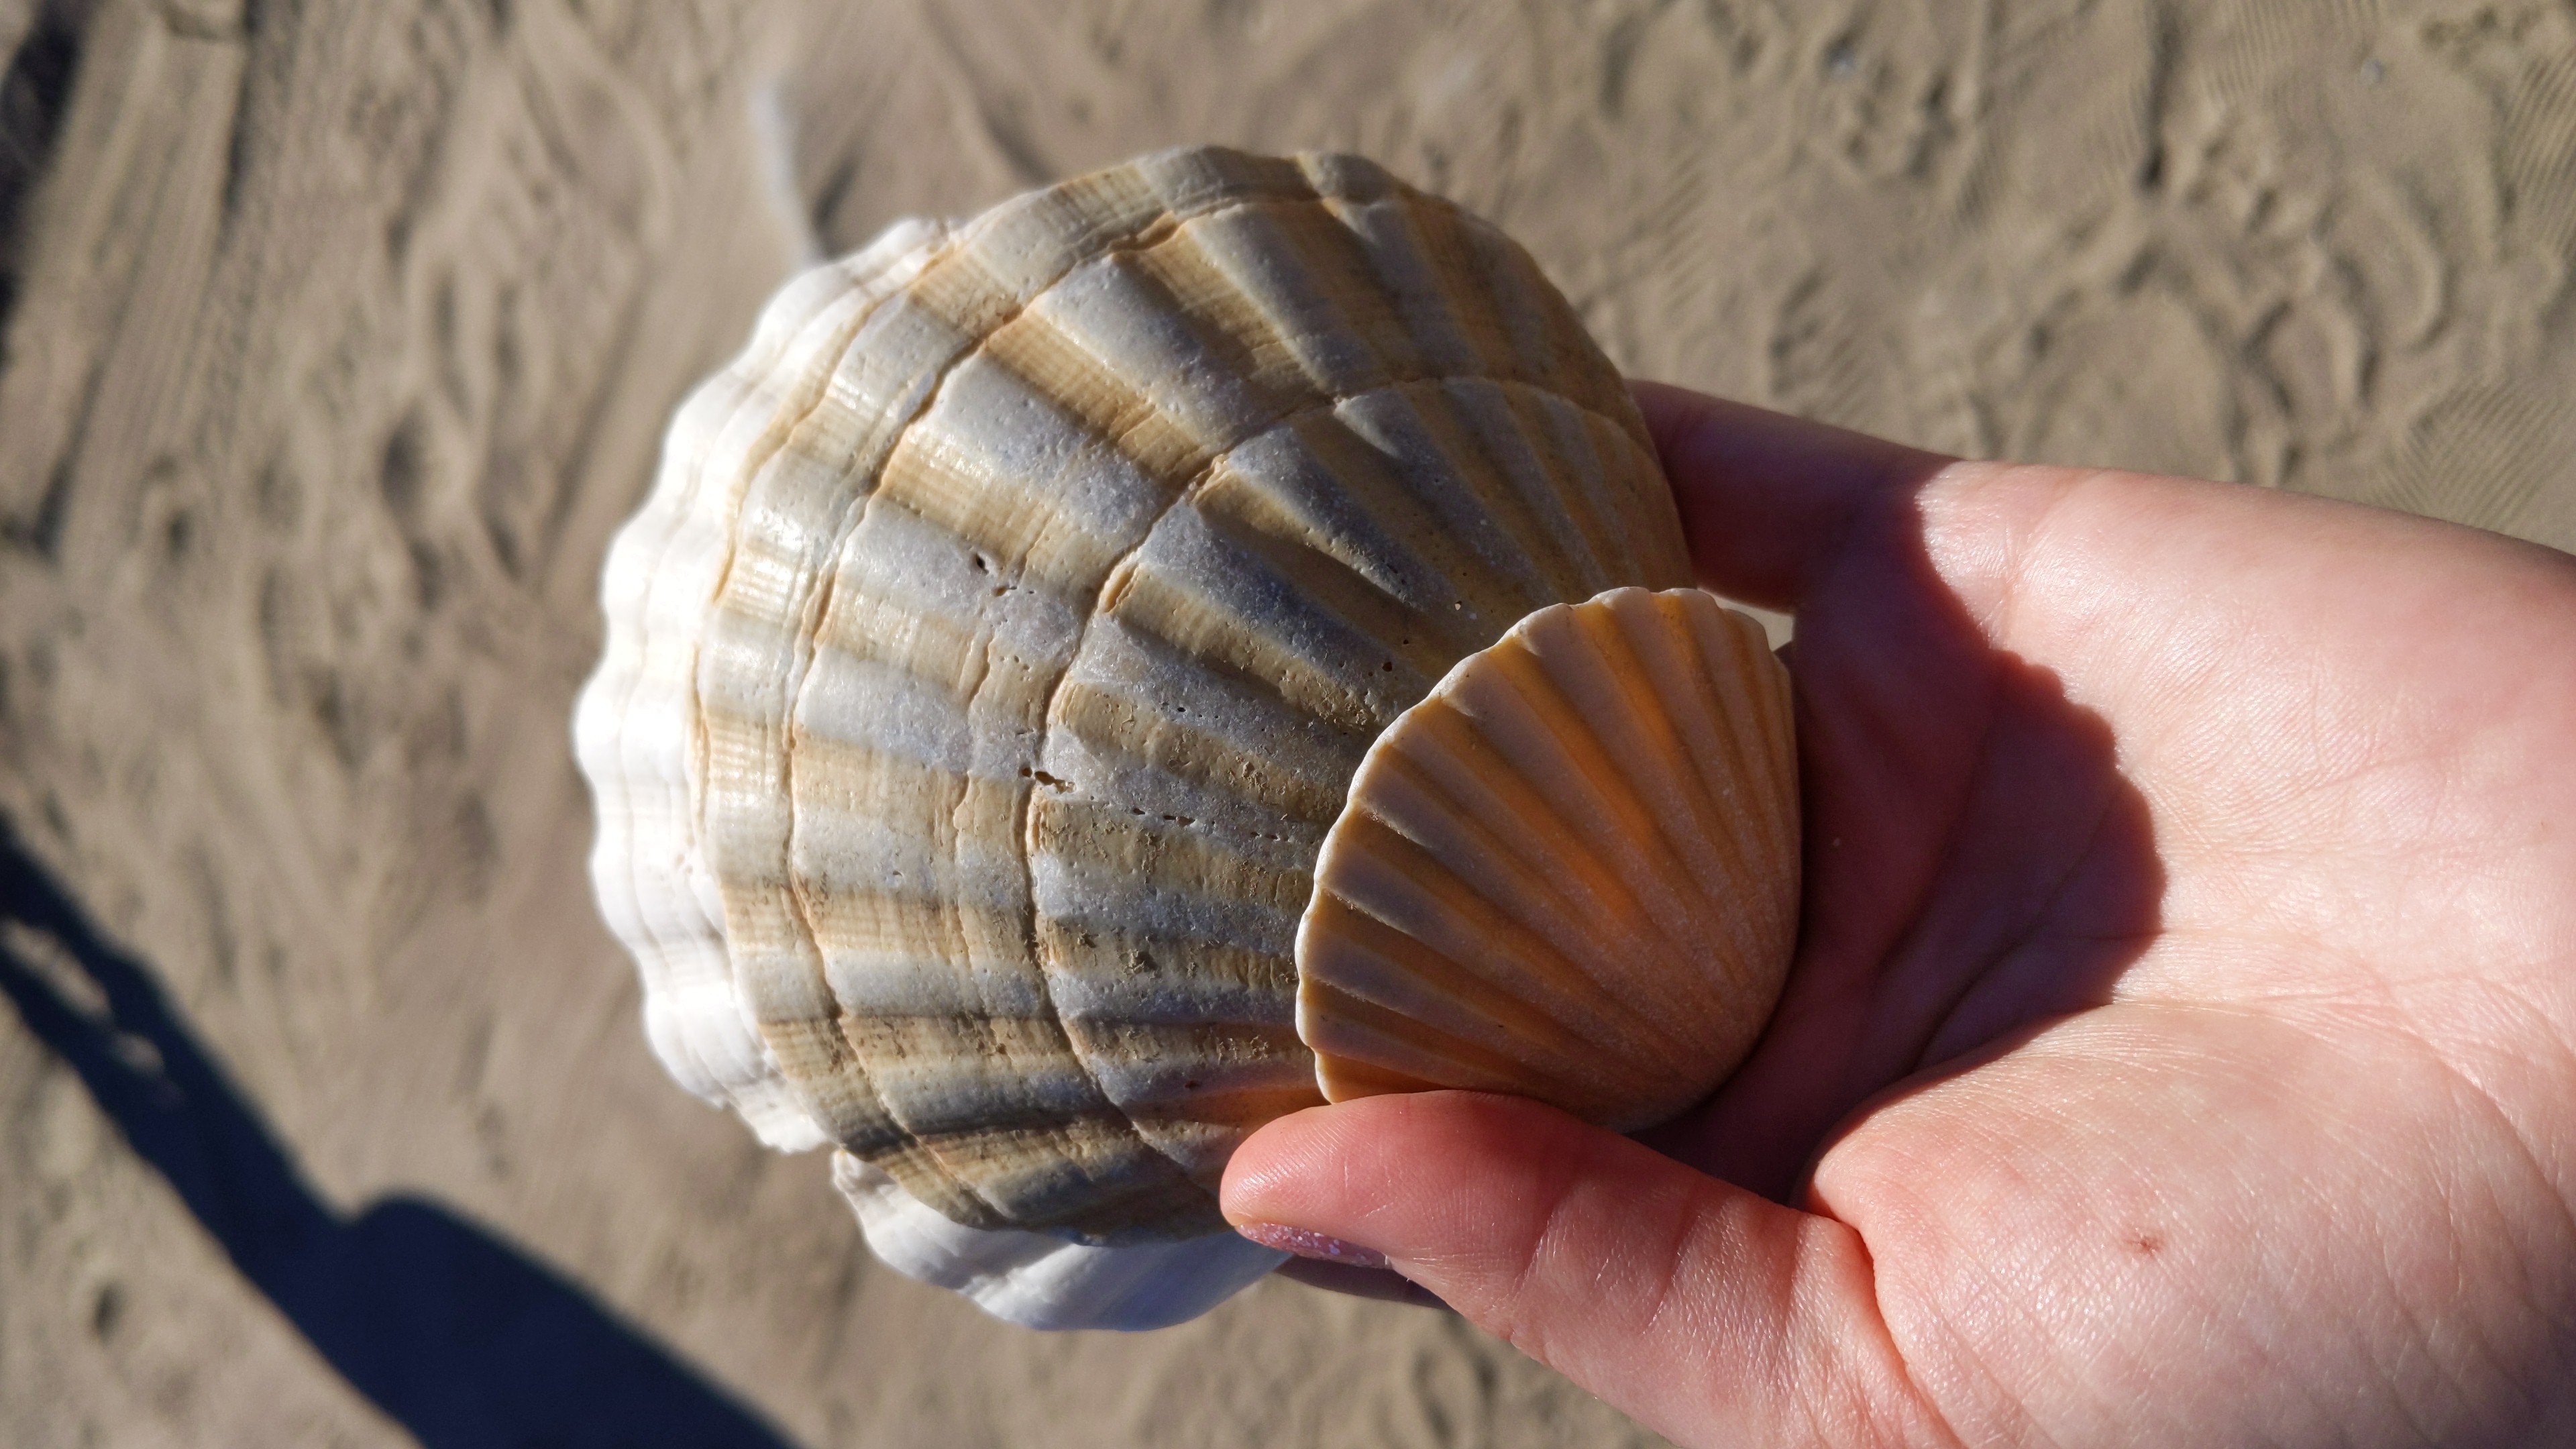 What a shell!